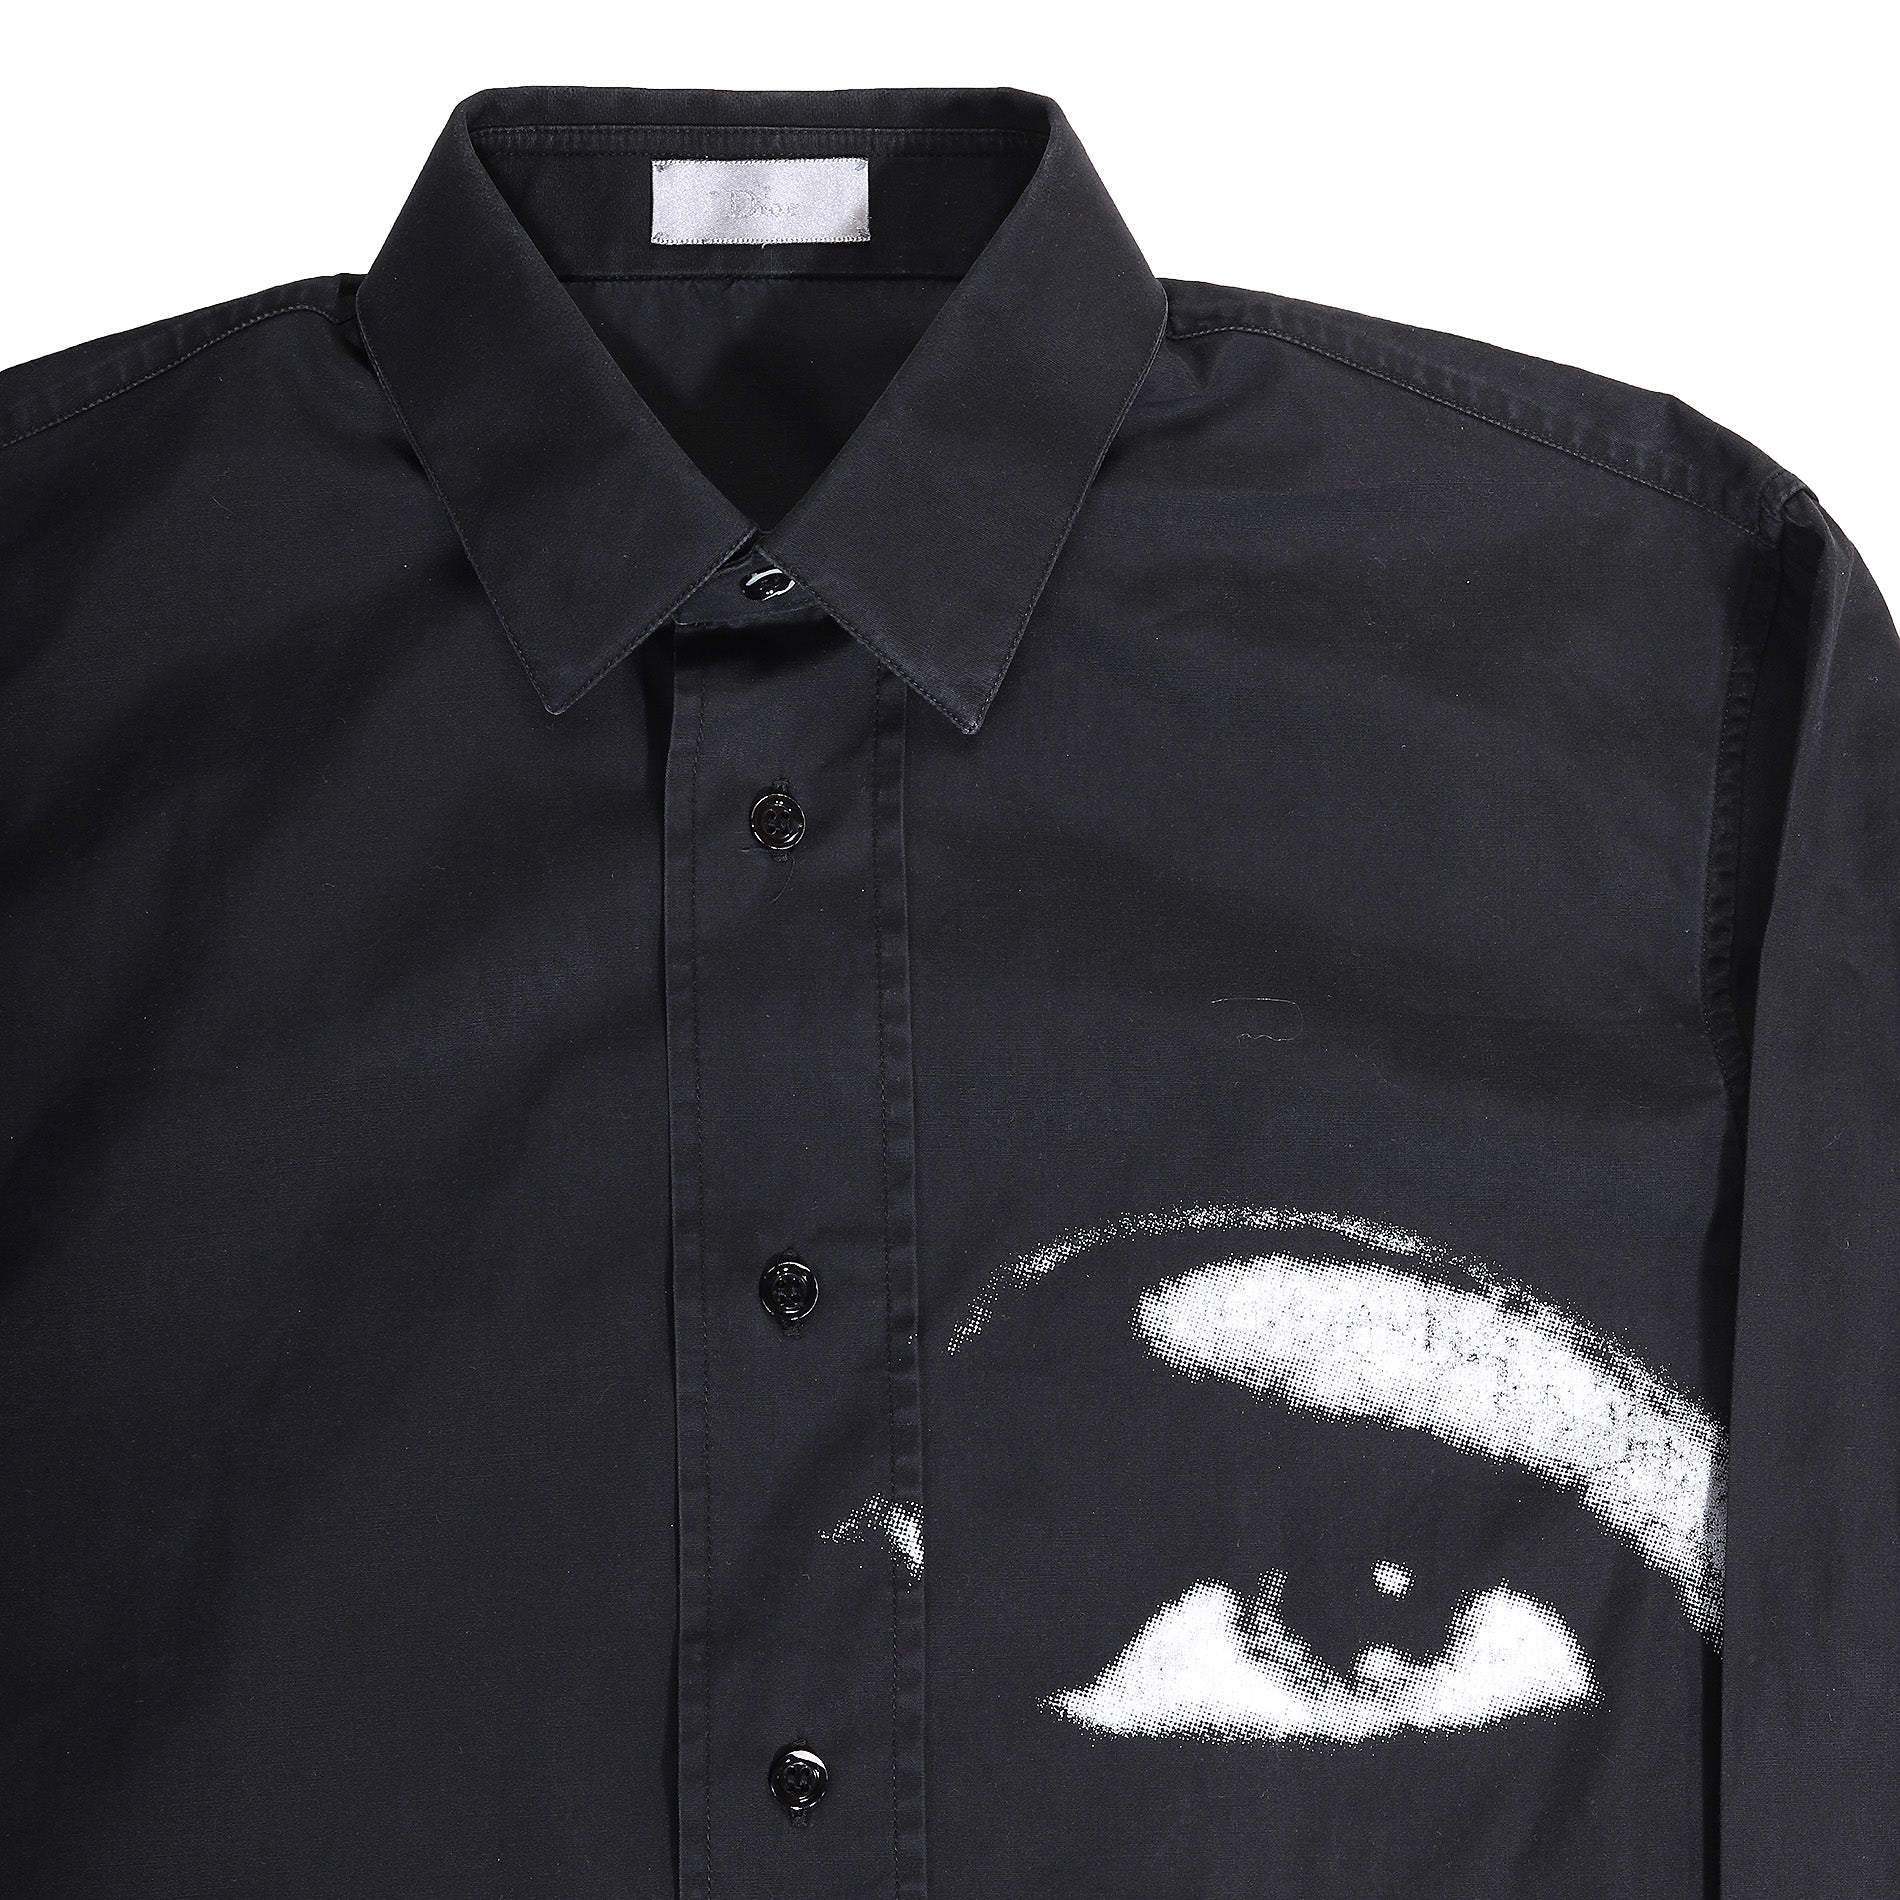 Dior Homme AW04 Victim of the Crime VOTC Eye Shirt